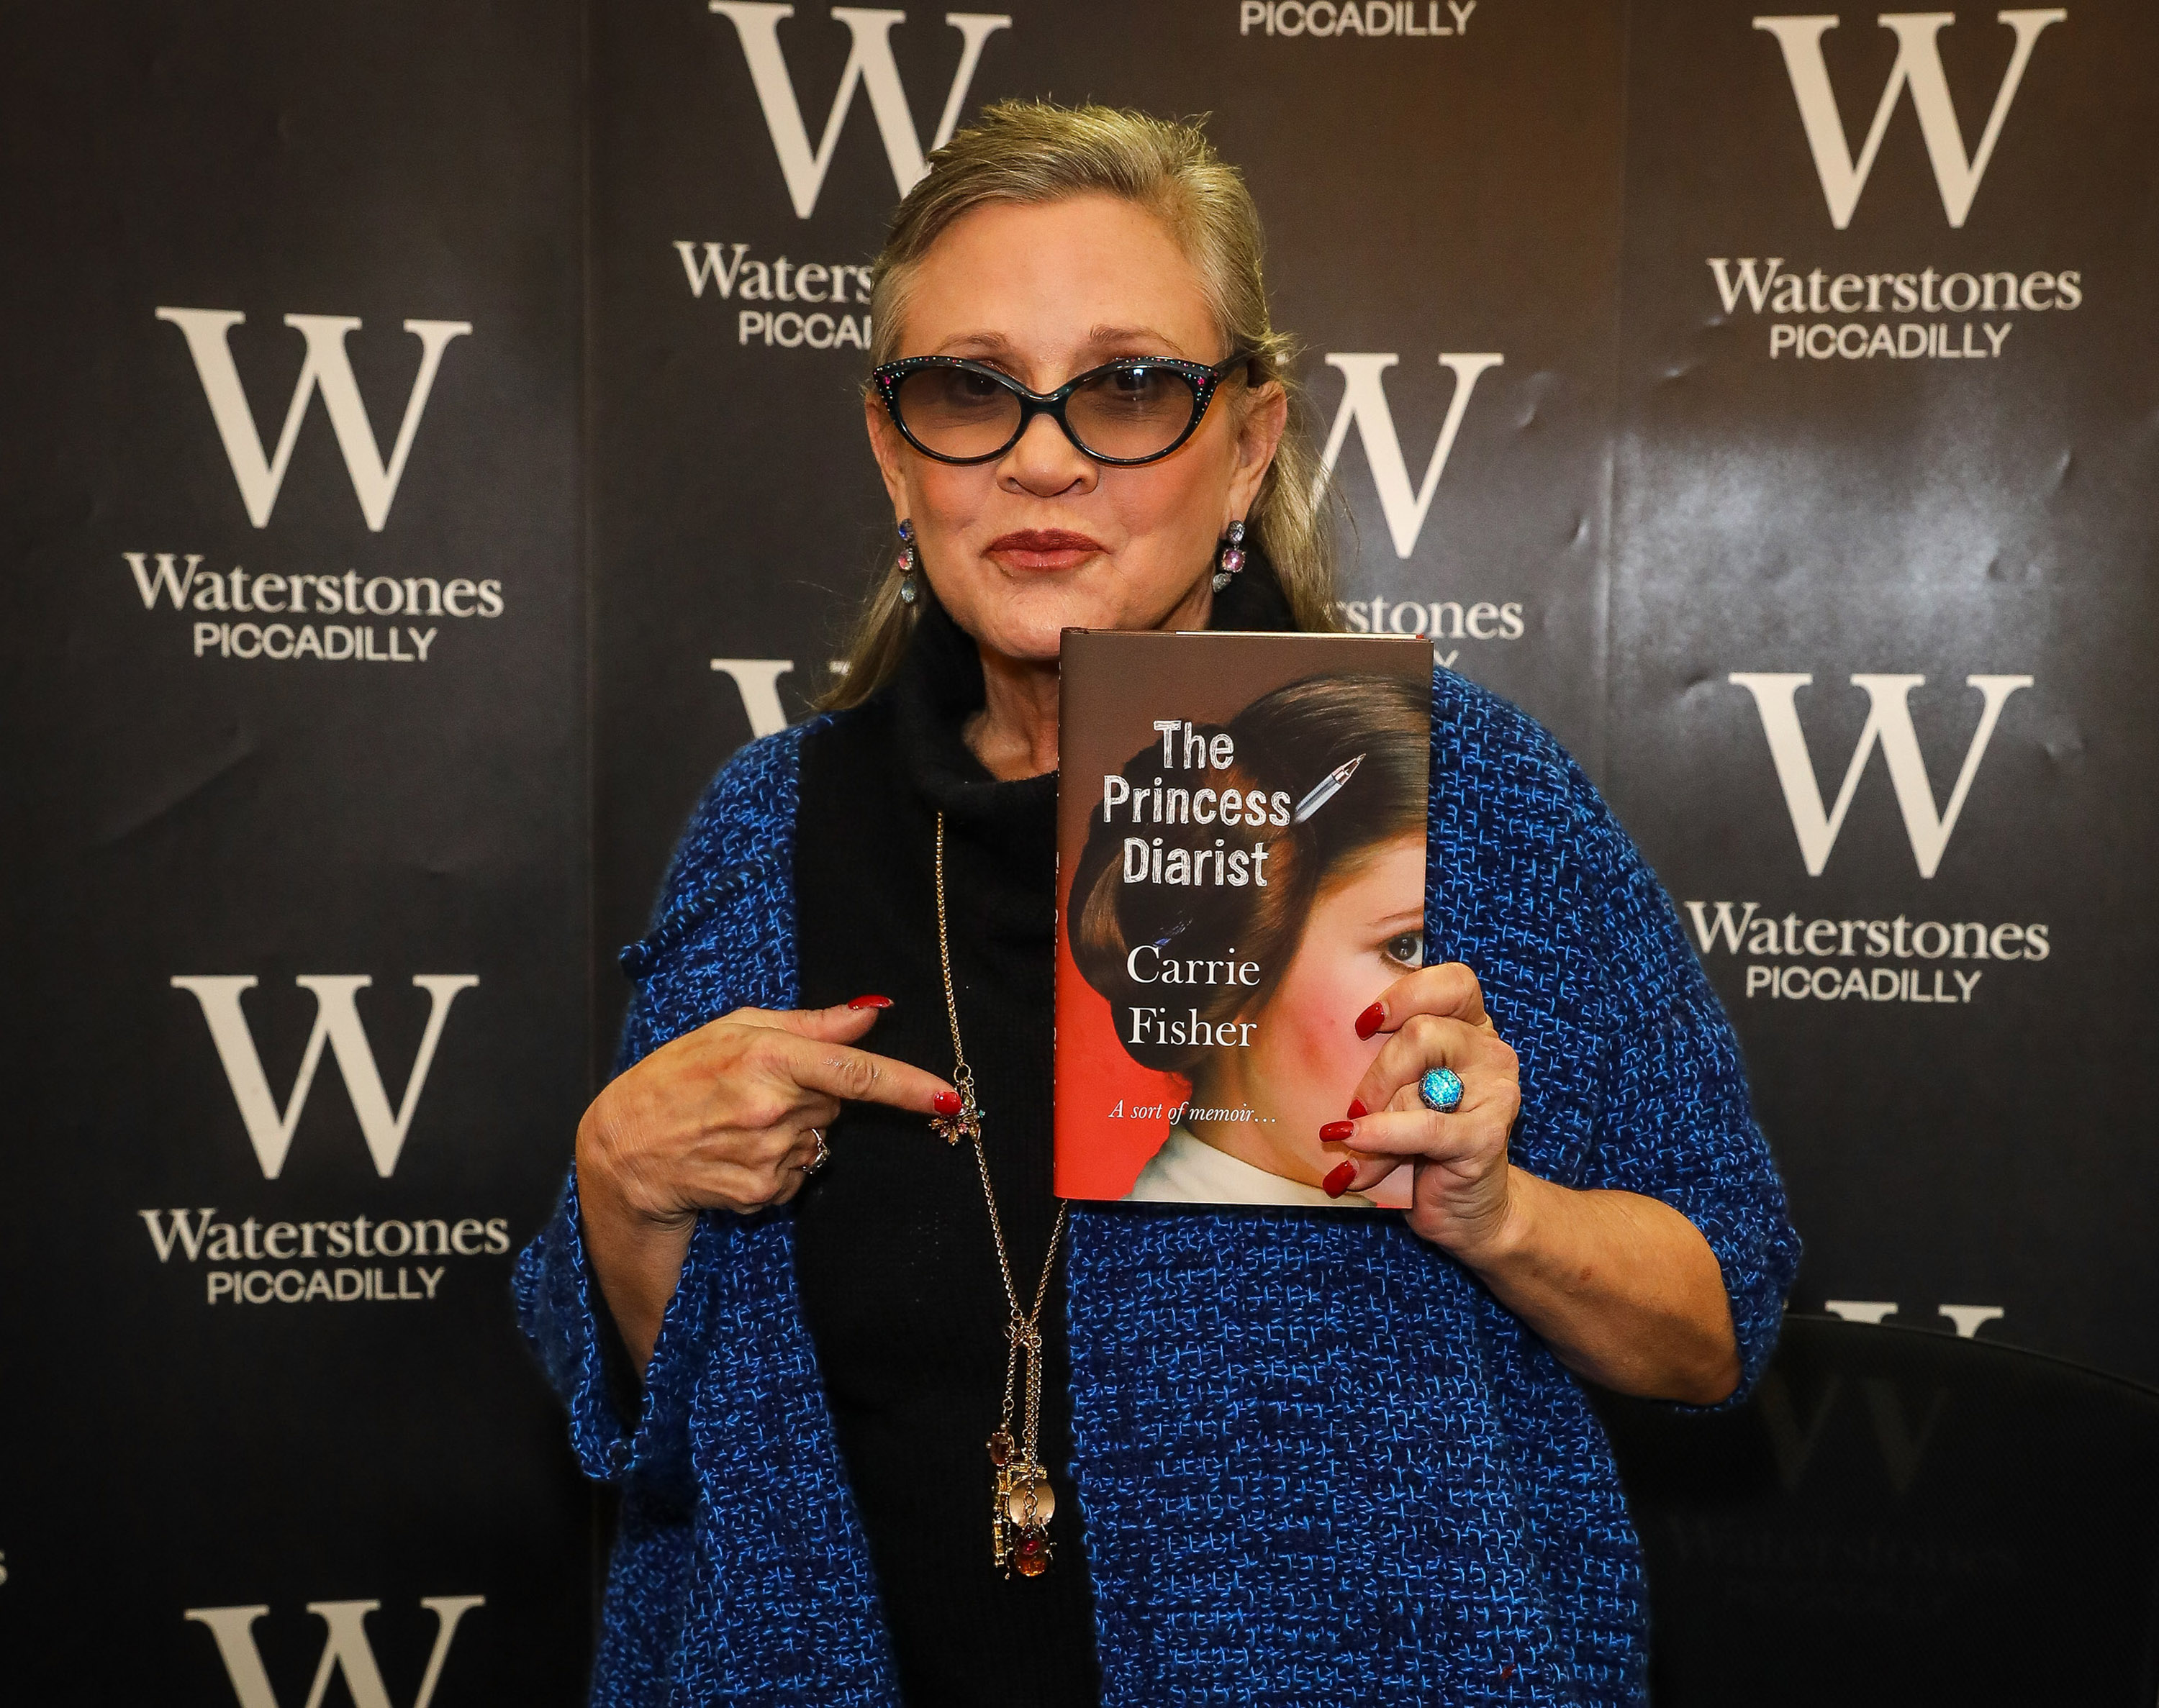 Carrie Fisher Signs Copies Of Her New Book "The Princess Diarist" At Waterstones Piccadilly